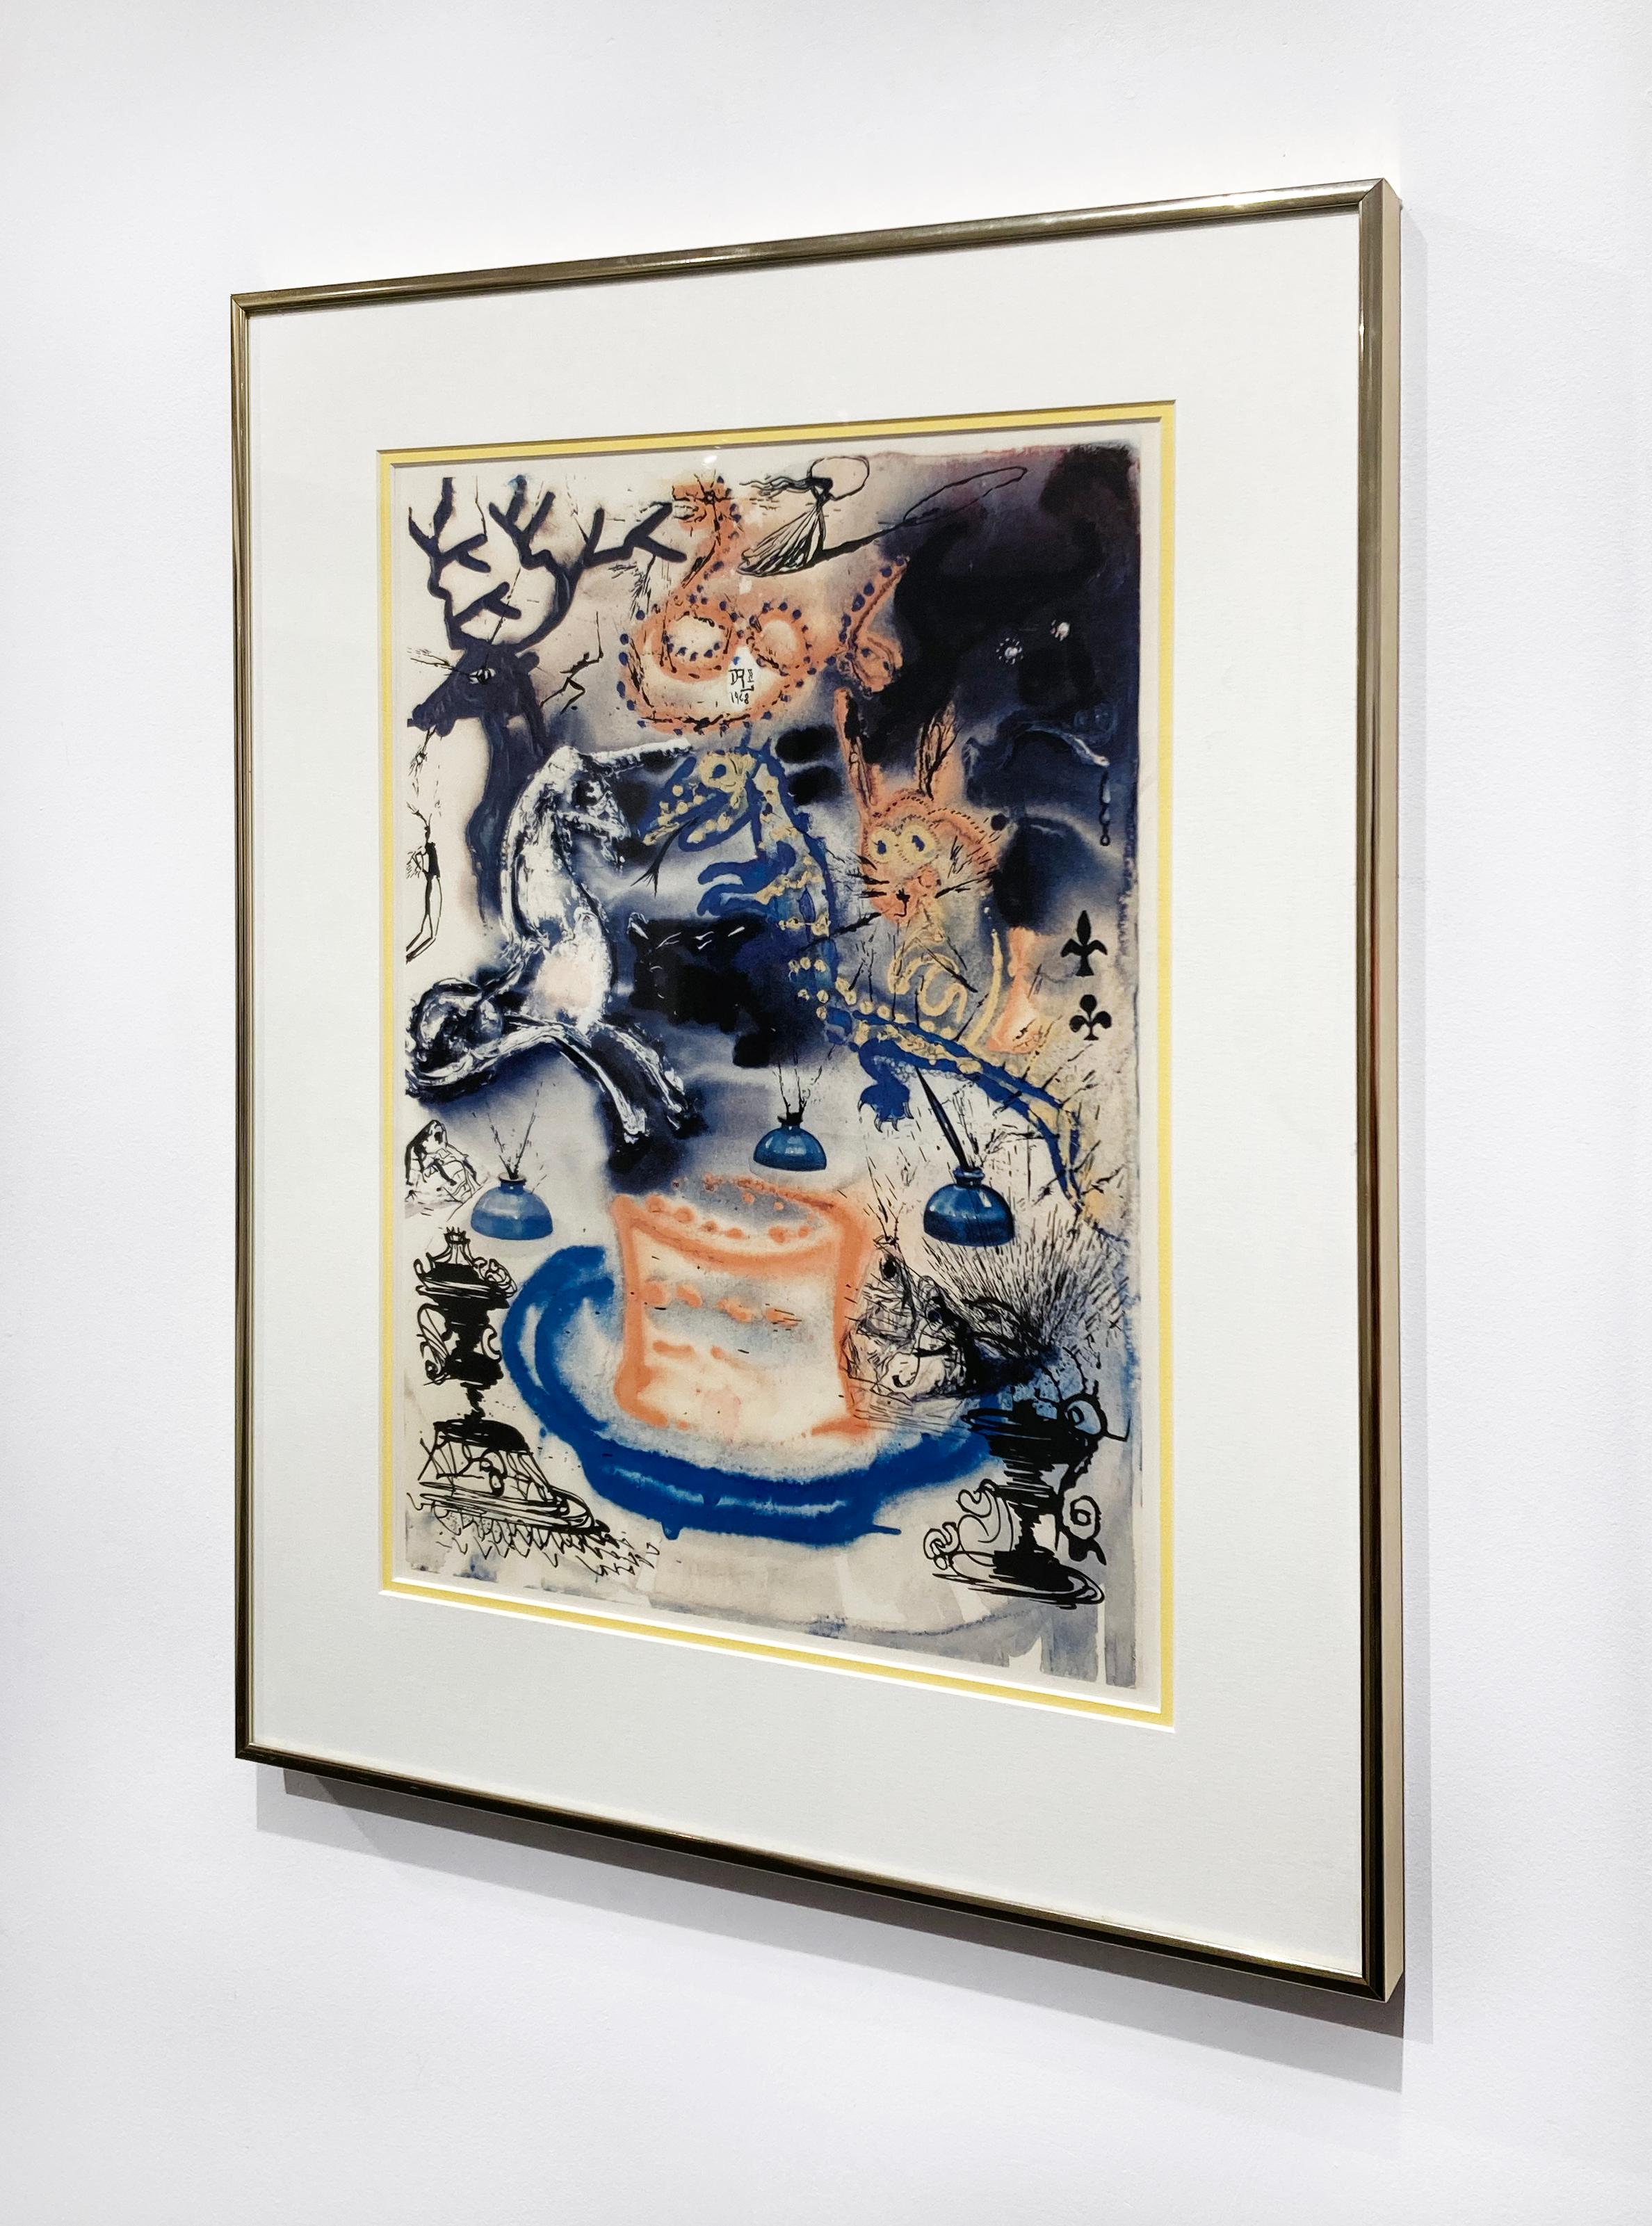 Artist:  Dali, Salvador
Title:  Who Stole the Tarts?
Series:  Alice in Wonderland
Date:  1969
Medium:  Photogravure printed in color
Unframed Dimensions:  15.25